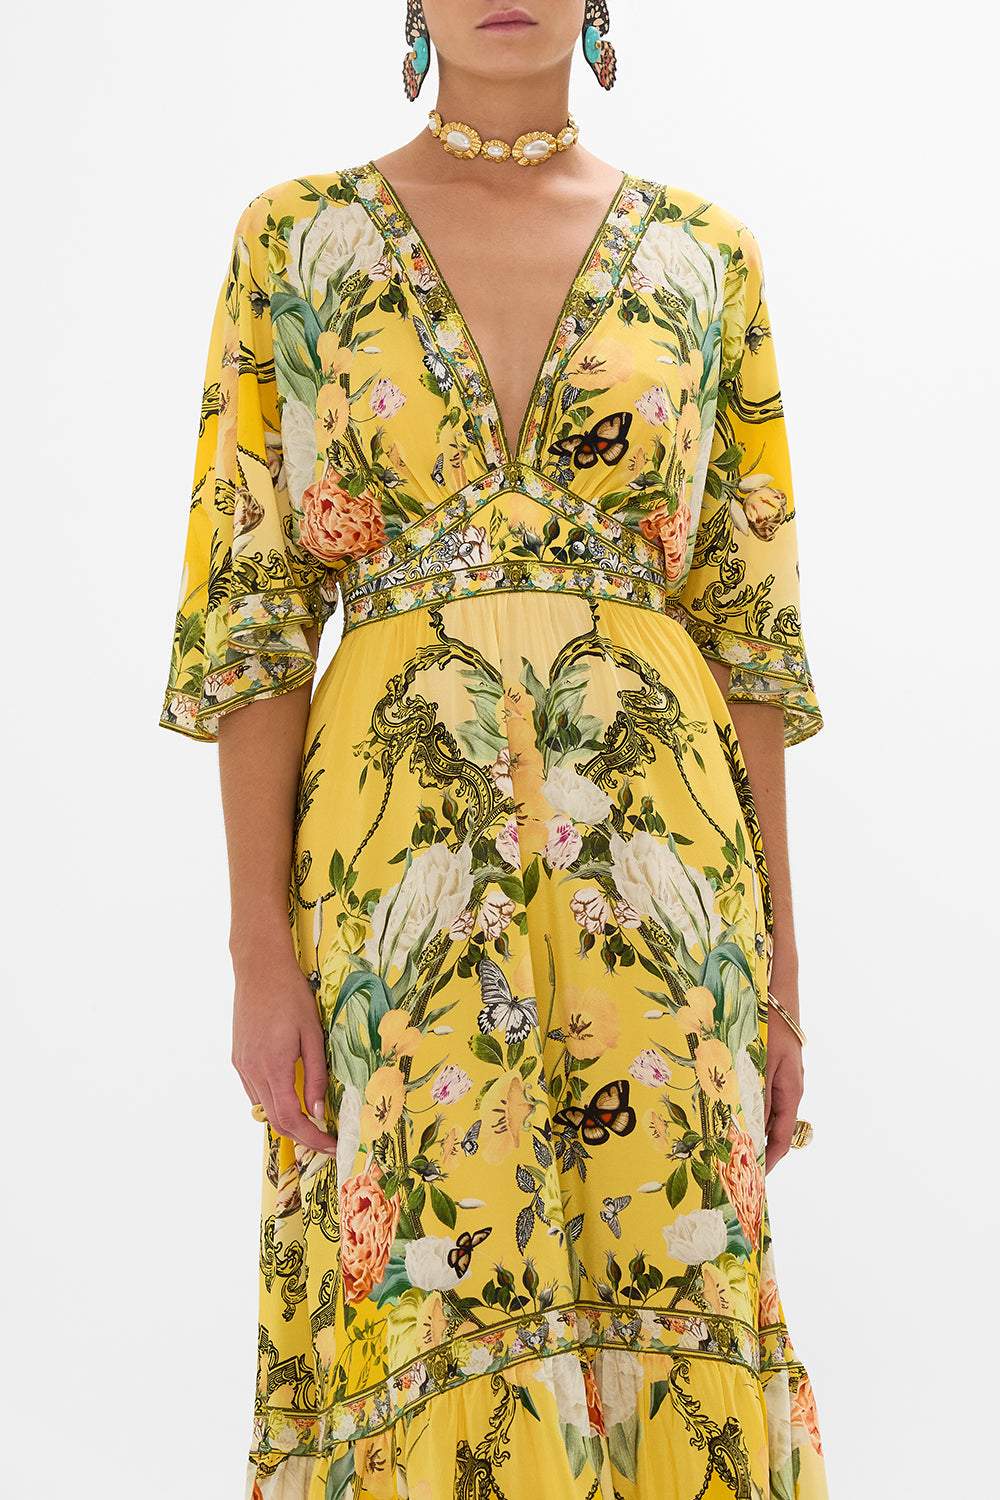 CAMILLA ruffle dress in Paths Of Gold print